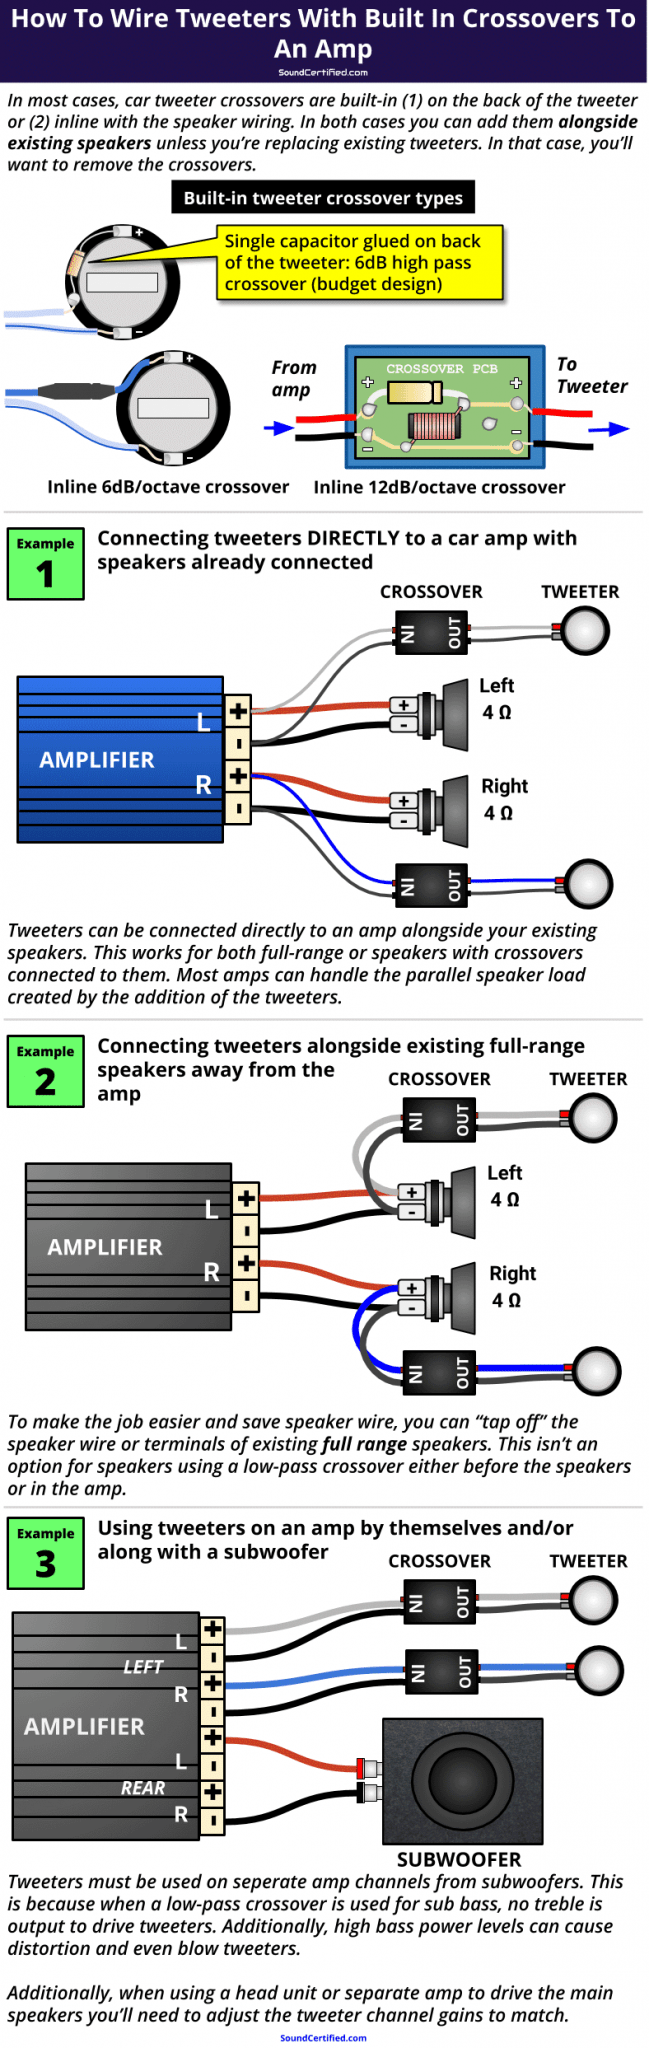 How To Wire Tweeters With A Built In Crossover To An Amp - Sound Certified